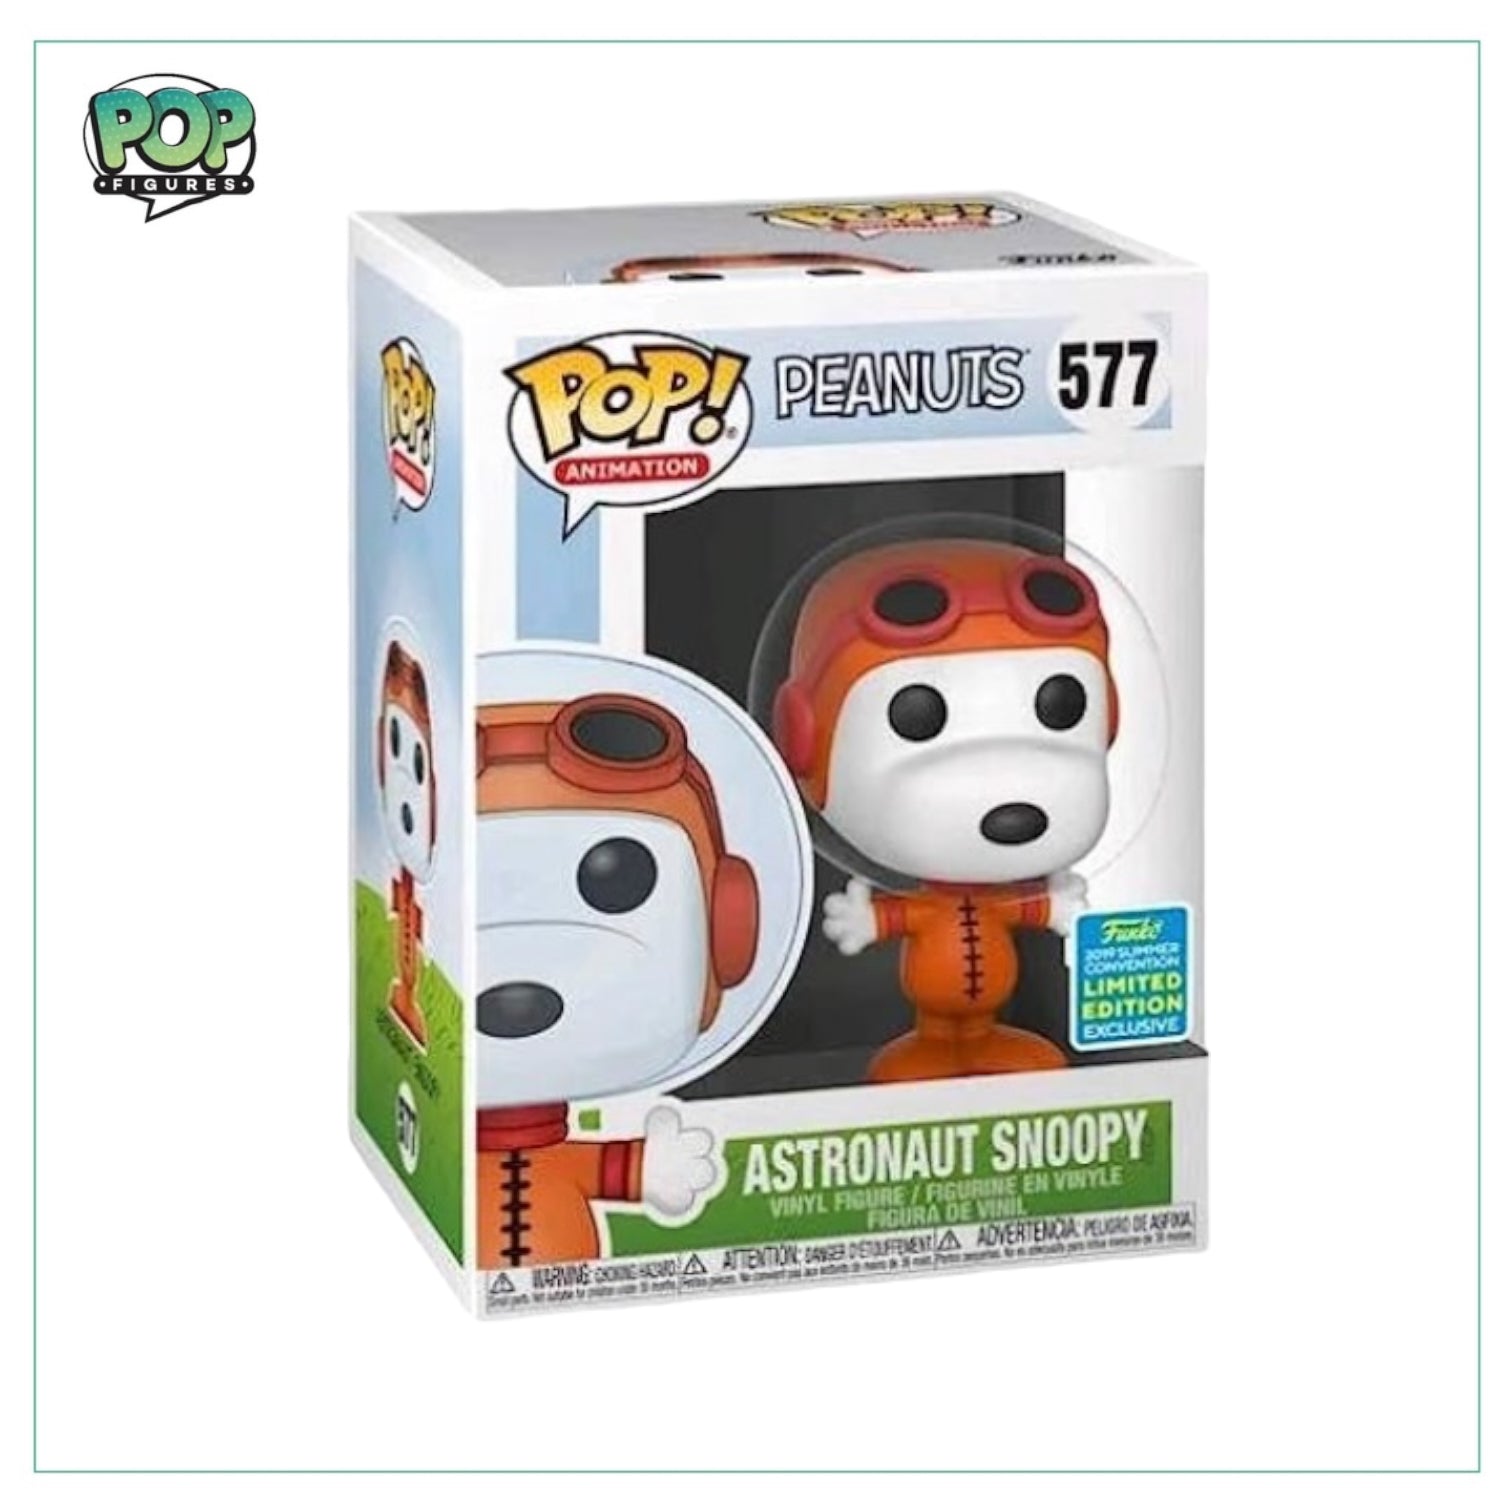 Astronaut Snoopy #577 Funko Pop! - Peanuts - 2019 SDCC Limited Edition Exclusive